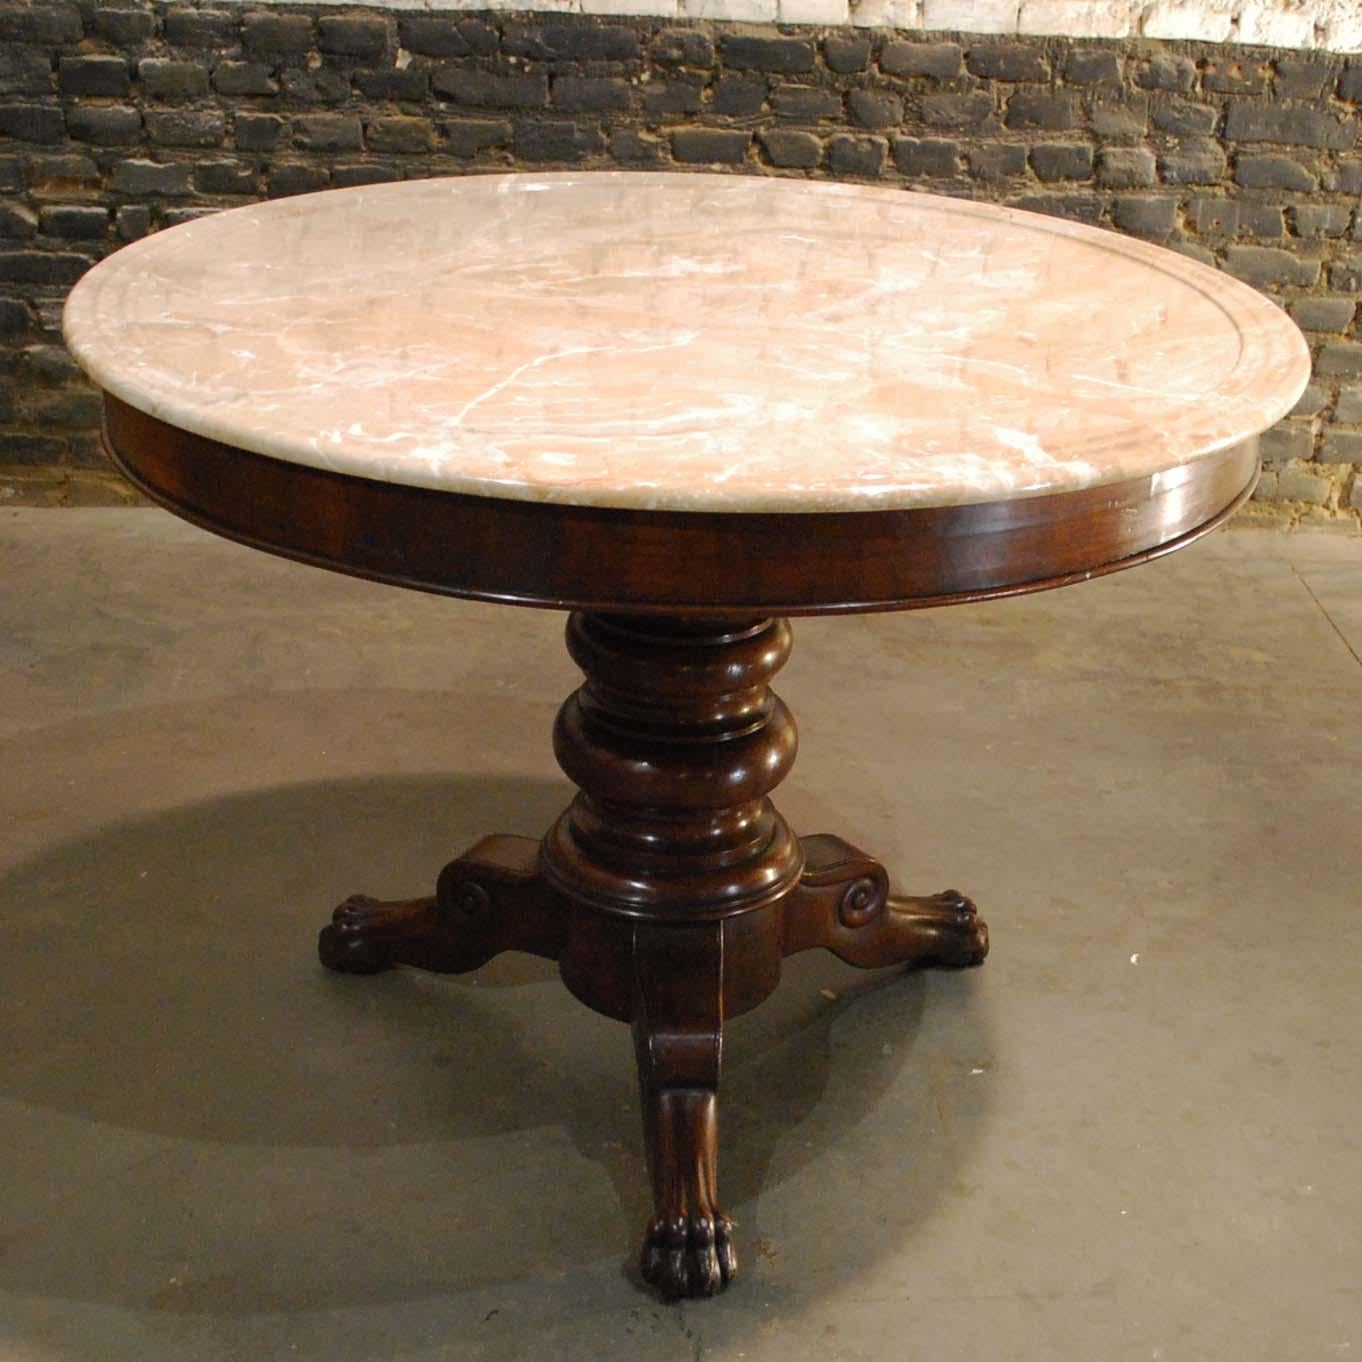 An elegant center table with a beautiful Botticino marble top. The top rests on a mahogany veneered skirt. The skirt is made in solid pine and is attached to the column by a wooden thread. The central column has a baluster shape that ends in a